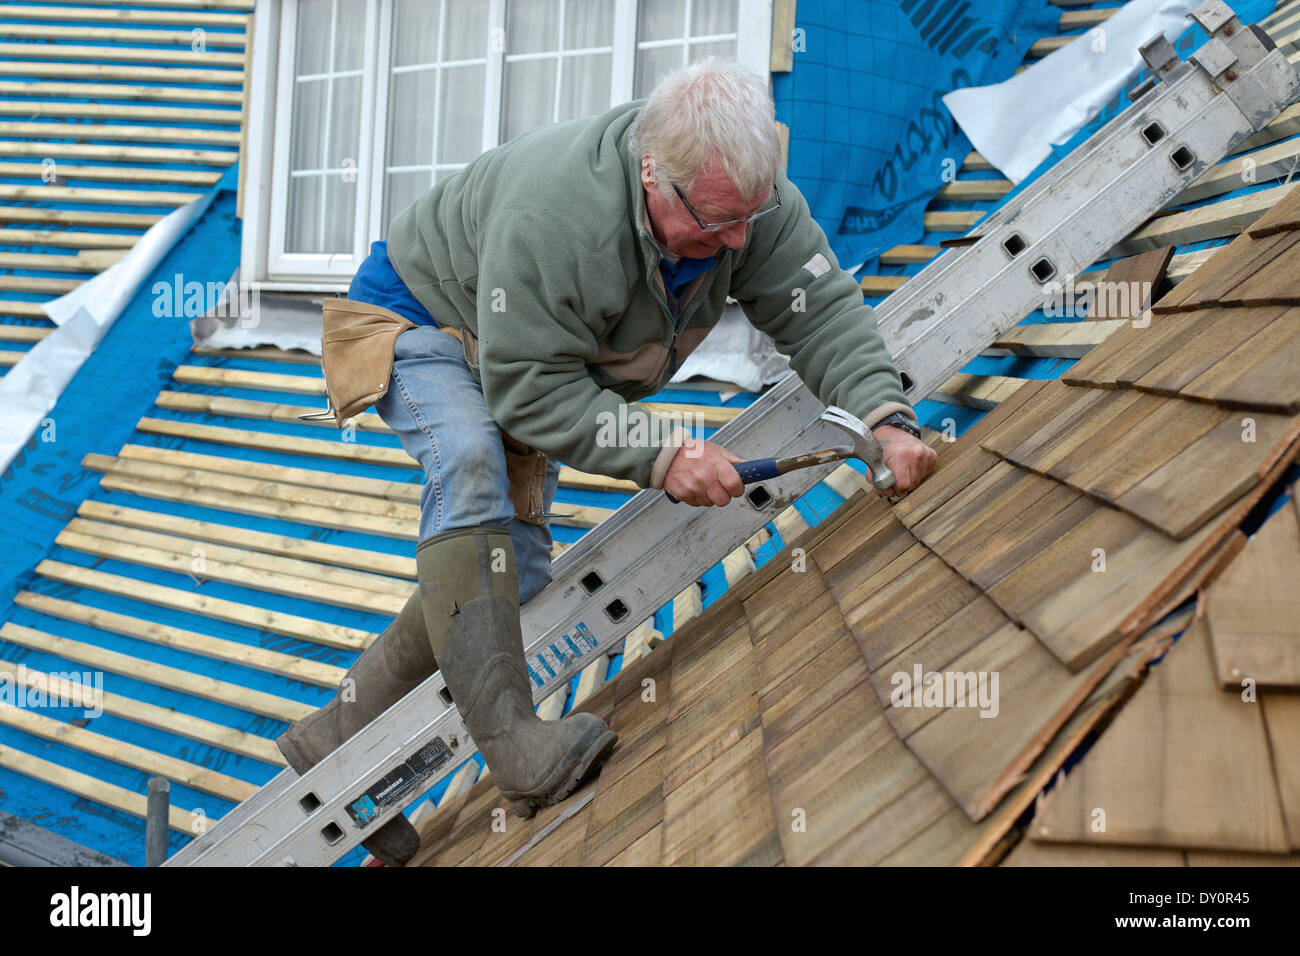 Home improvements - a roofer replaces a roof with cedar shingles, a thermally efficient, ecologically friendly material. Stock Photo